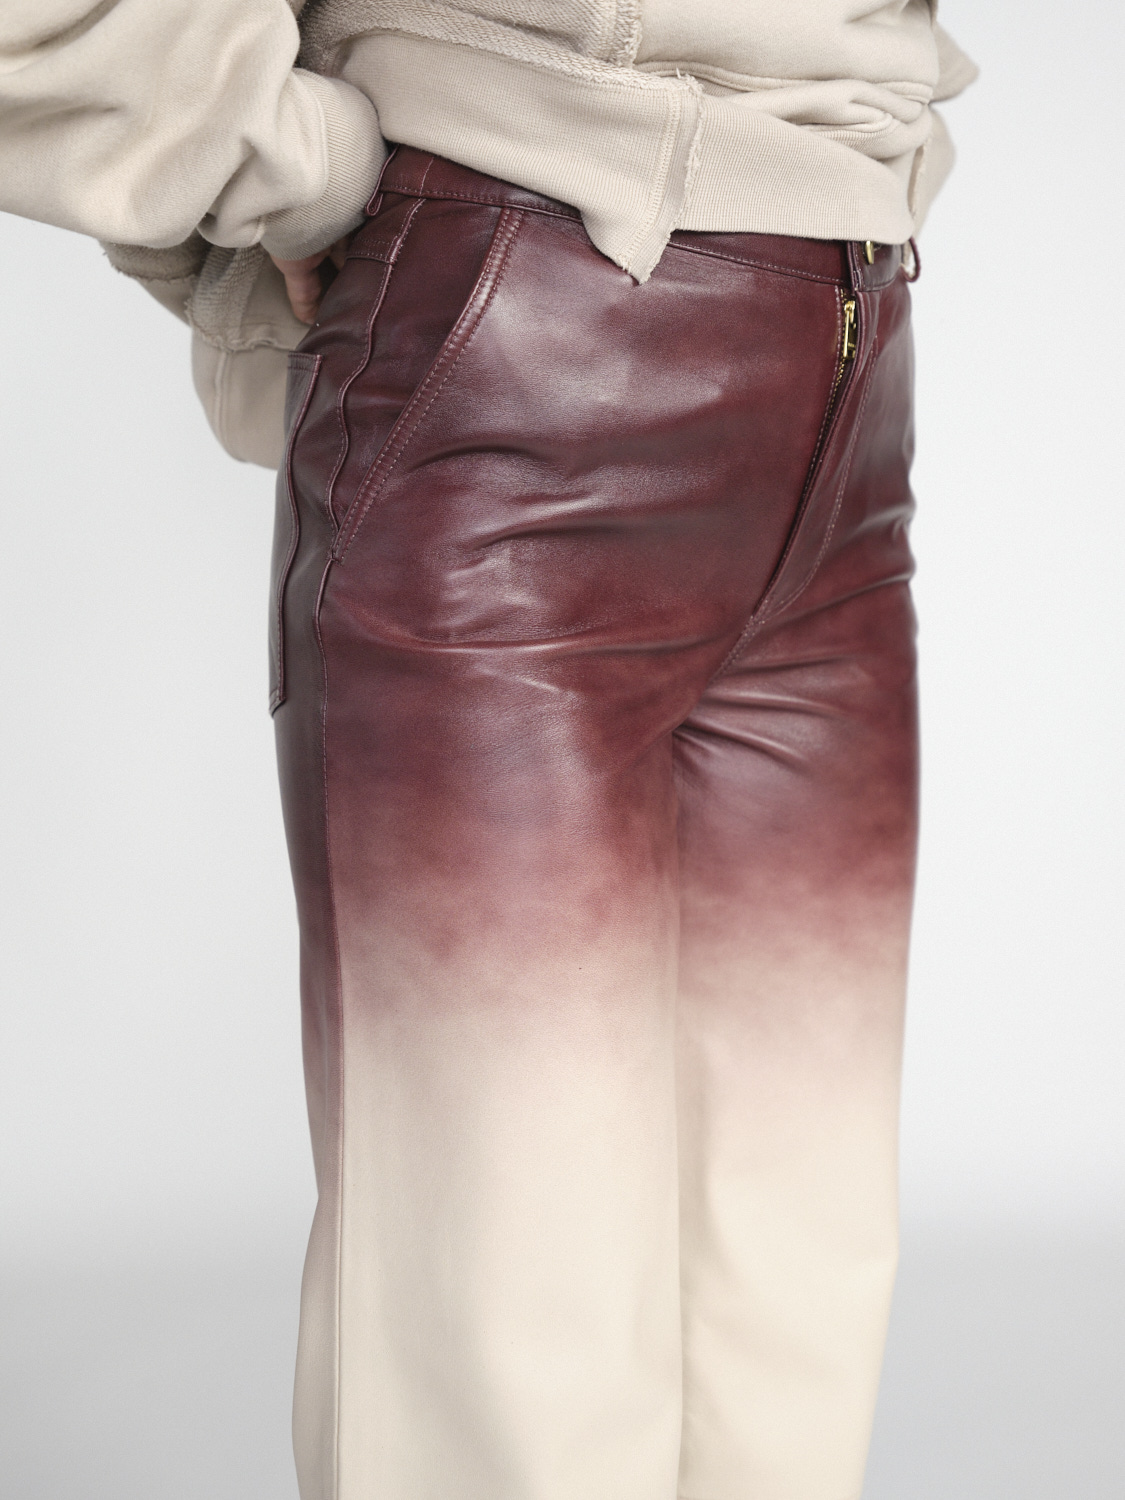 Arma Galizia – leather trousers with degradé effect  brown 36